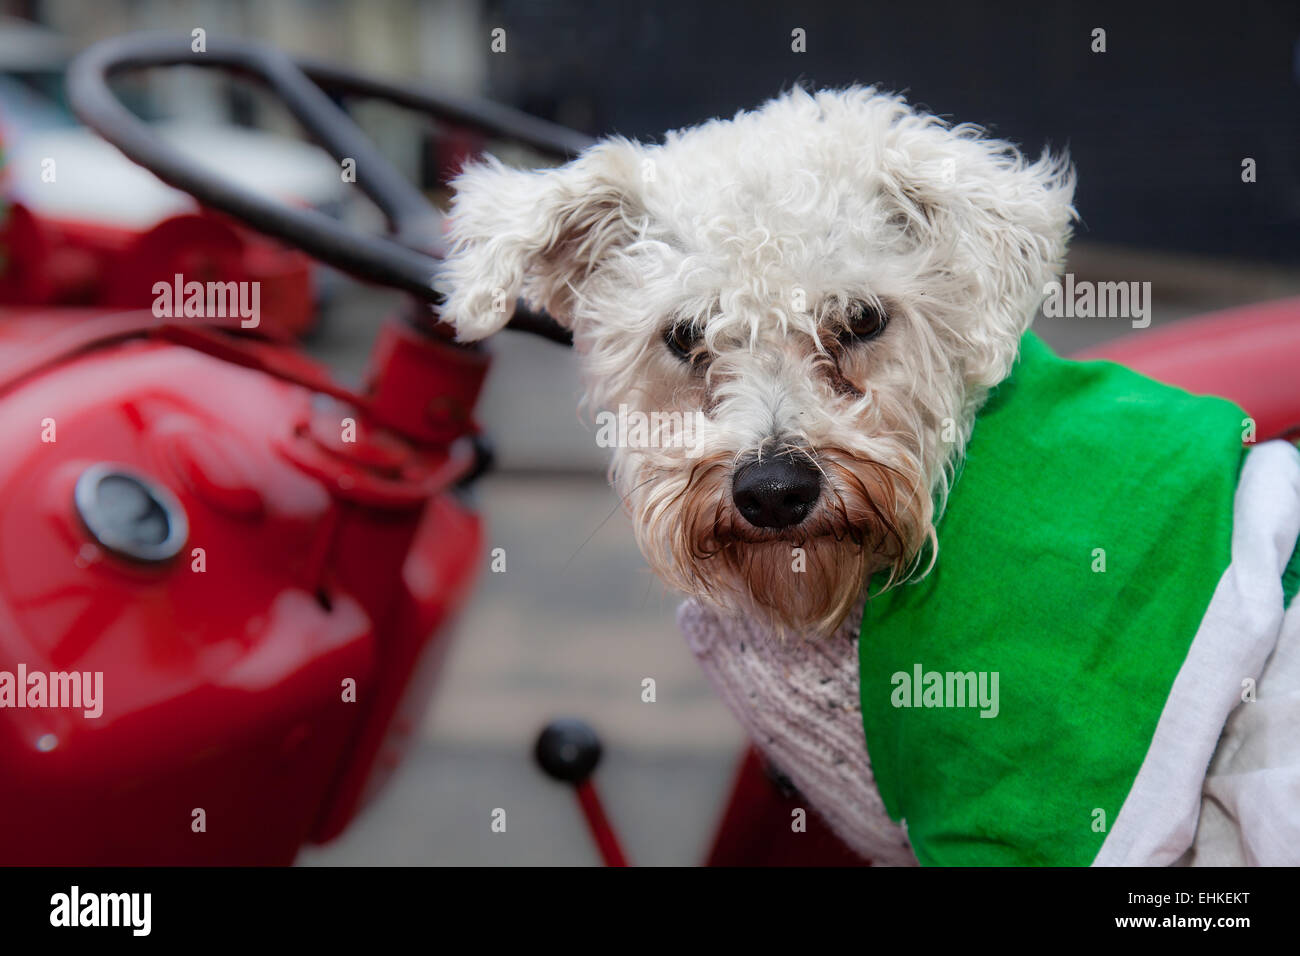 Manchester, UK 15th March, 2015.  'Bow' a Bichon Schnauzer cross at the St Patrick's weekend Irish Festival.  Thousands of people lined the streets to watch as the St Patrick’s Day parade made its way through Manchester.  The colourful procession set off from the Irish World Heritage Centre in Cheetham Hill before making its way to Albert Square.  Flag bearers representing the 32 counties in the Emerald Isle led the parade into the city centre, followed by floats from the city’s Irish associations. Stock Photo